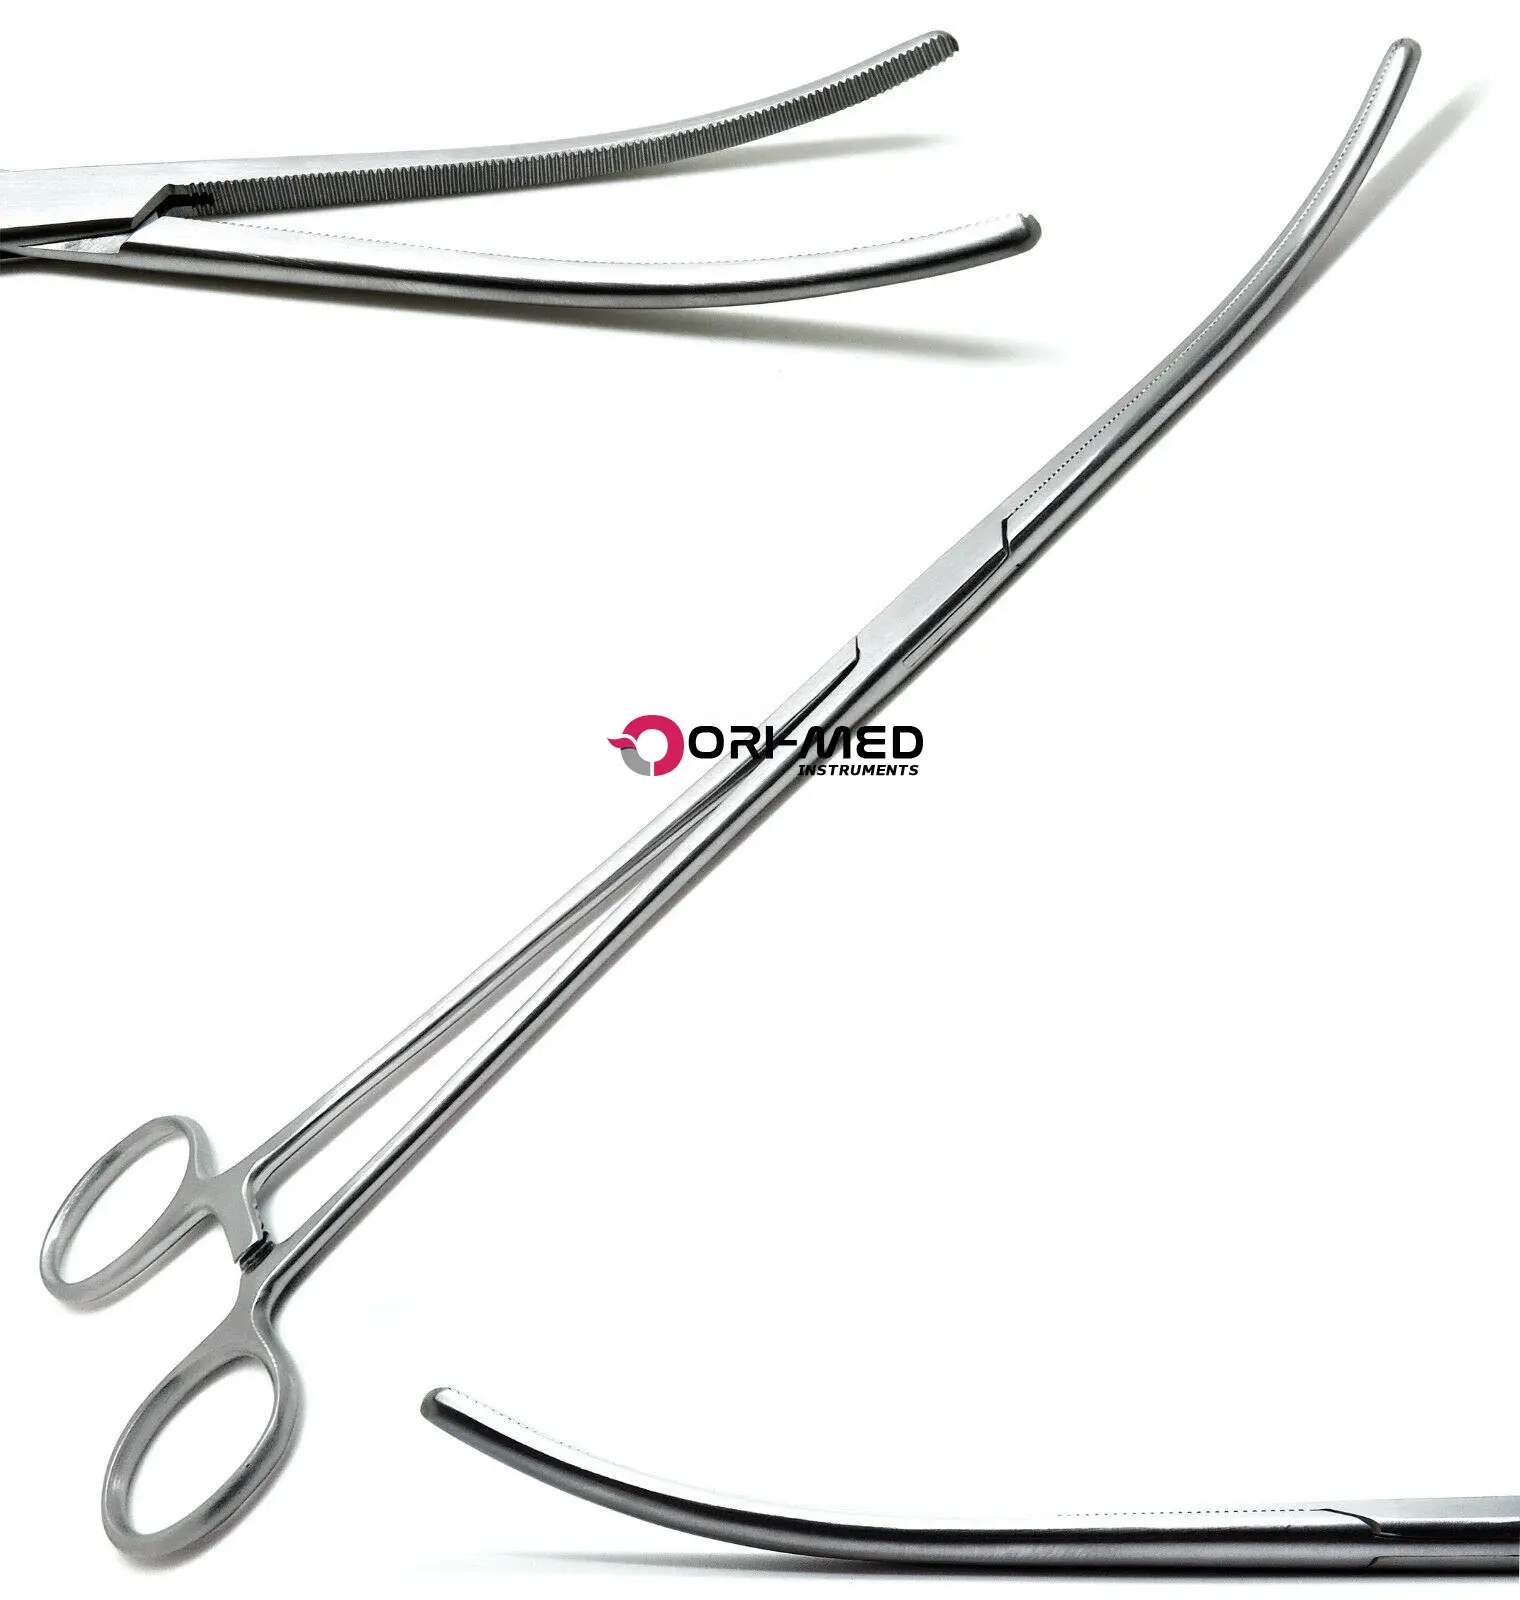 Dental Surgical Hemostat Pean Rochester Curved Forceps 12" Metal Steel CE Certified with 1 Year Warranty Manual Power Source